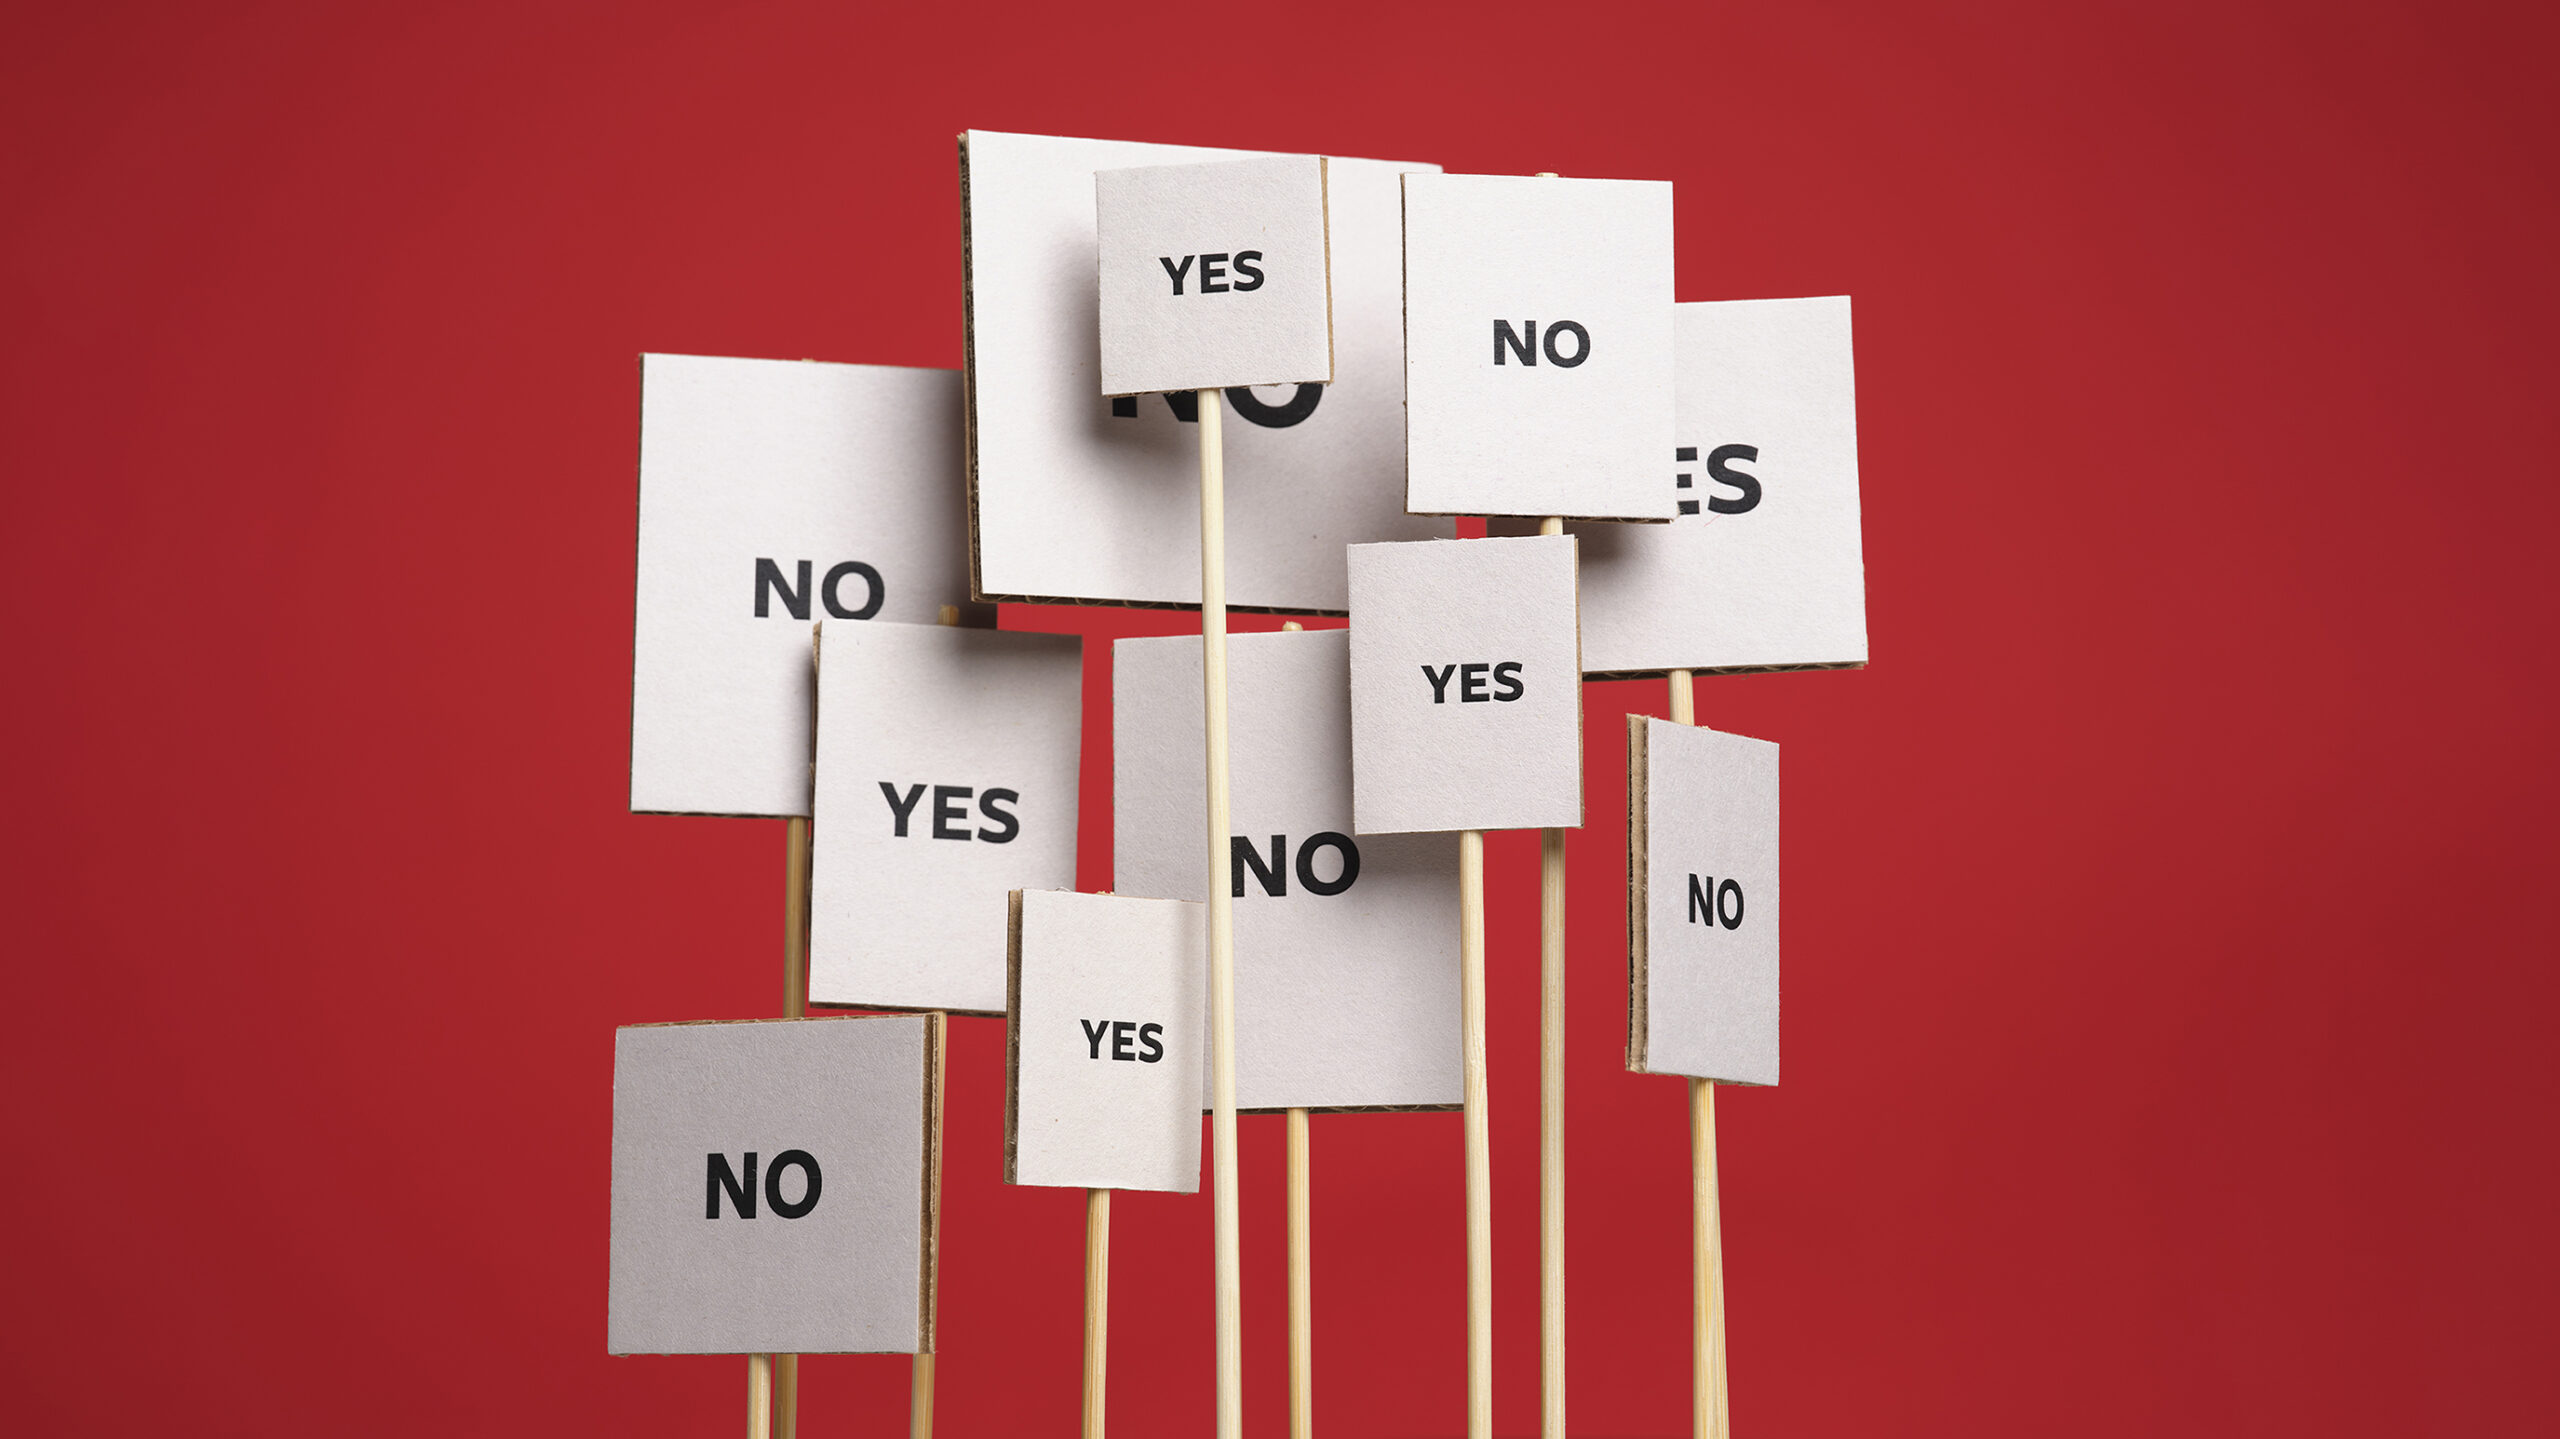 A crowd of placards with the words "Yes" and "No" on them, against a red background.